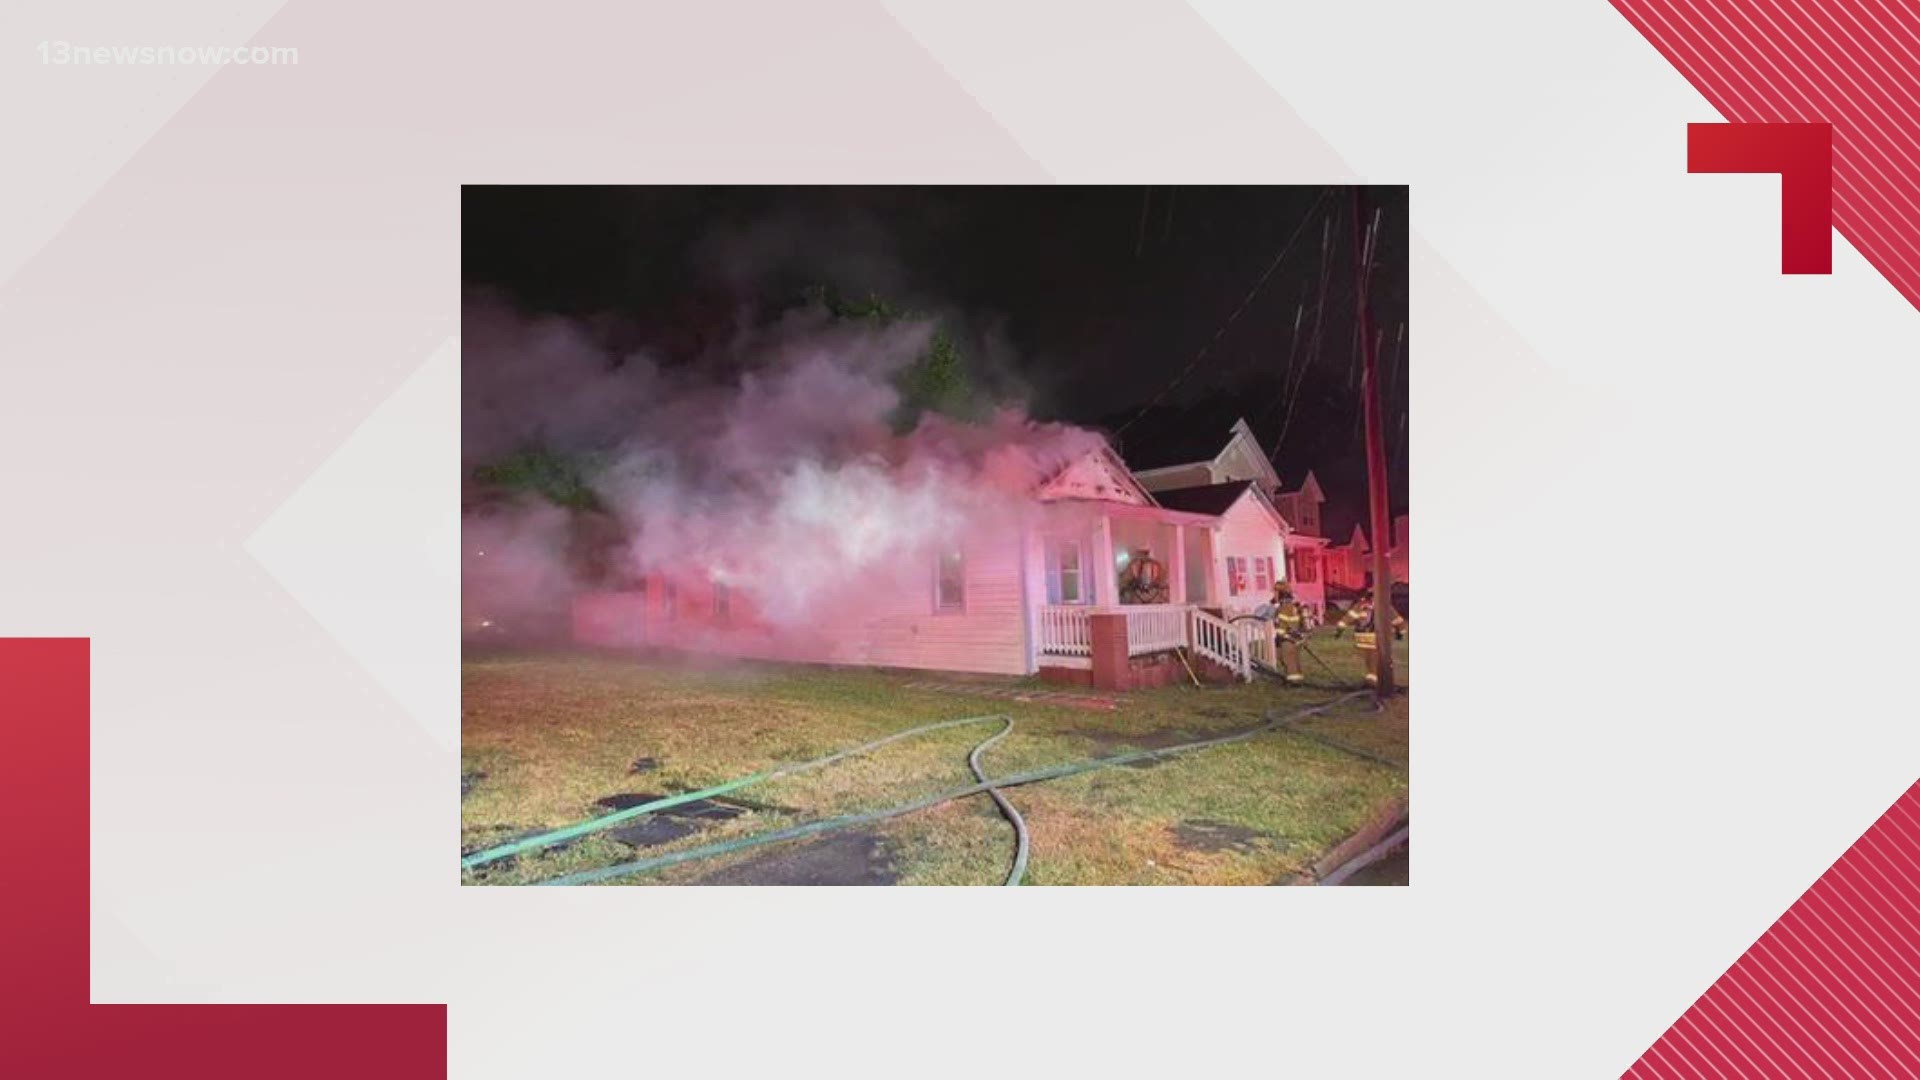 Portsmouth Fire, Rescue and Emergency Services said a house fire happened overnight in the 1500 block of Highland Avenue.